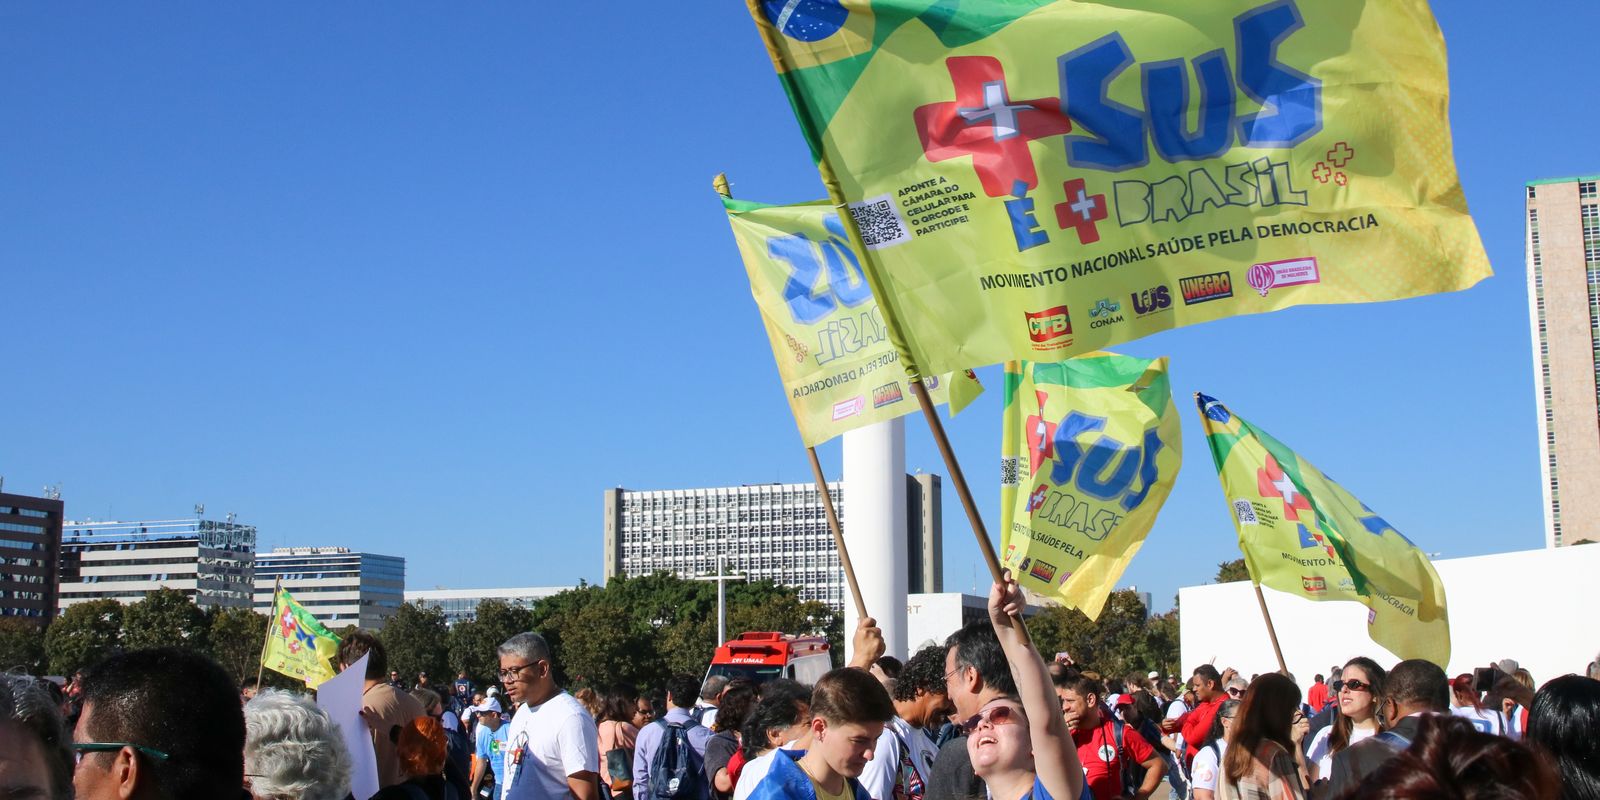 Law in Brasilia defends SUS, life and democracy